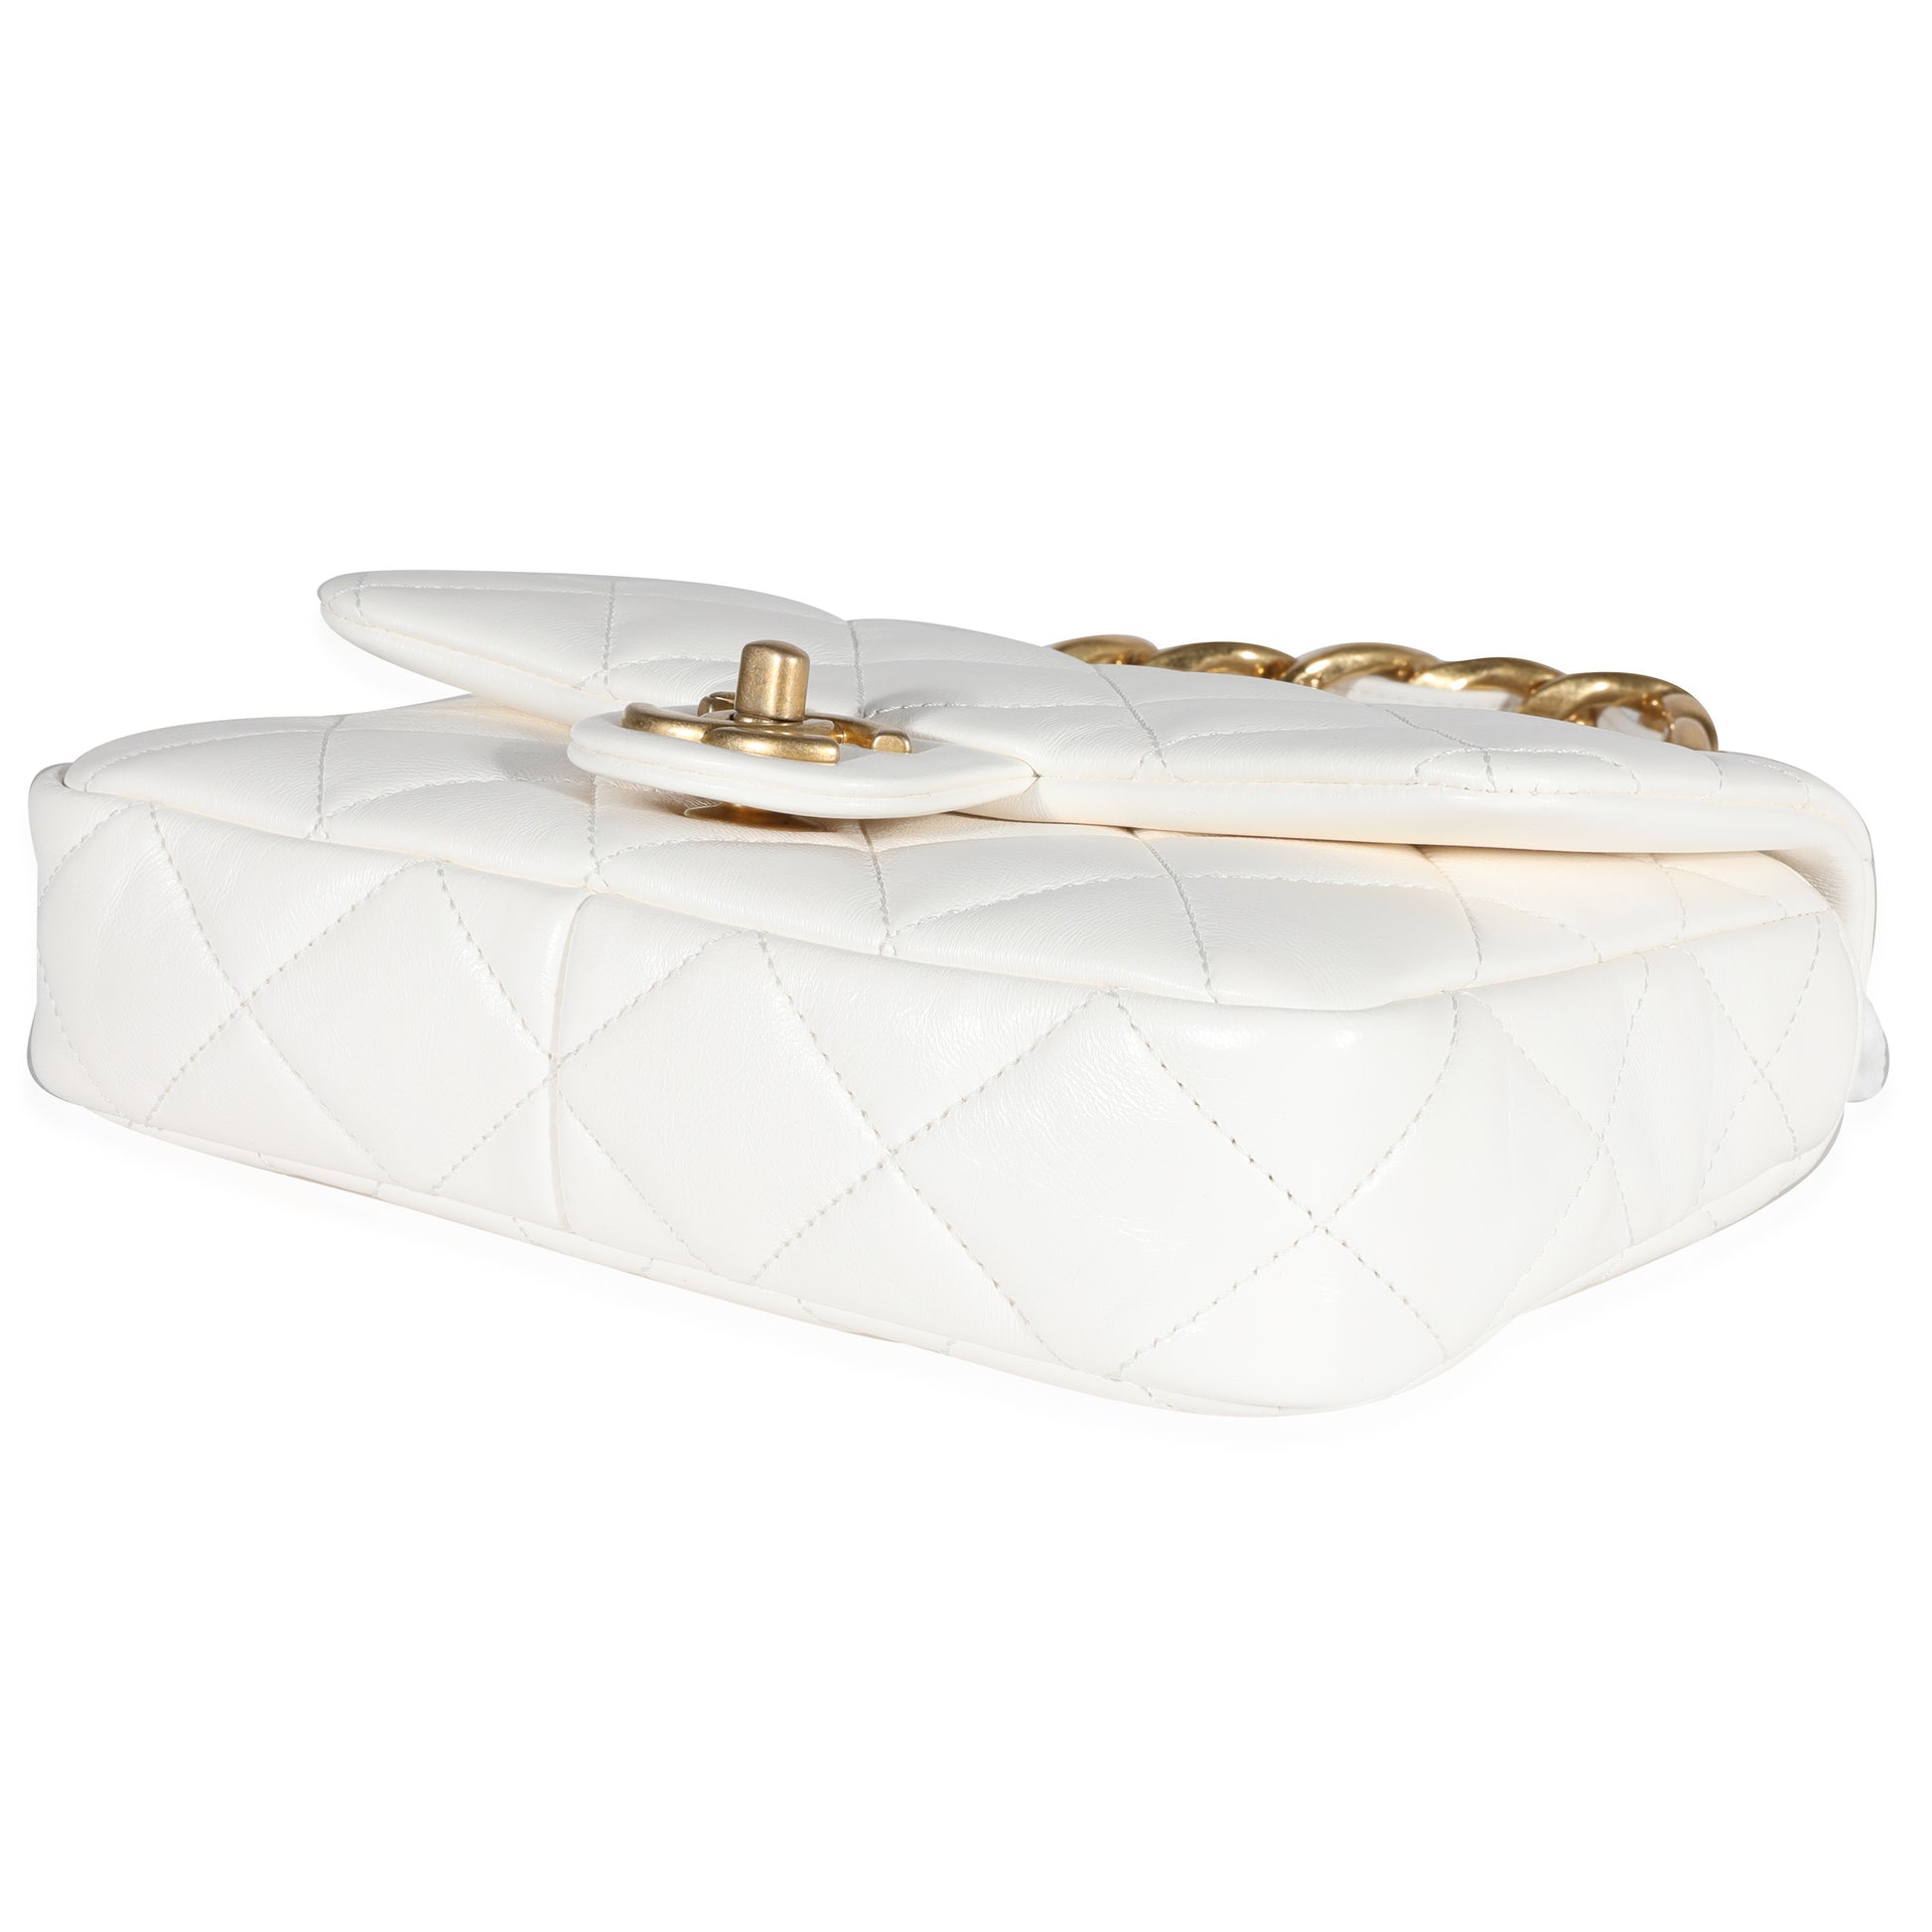 Chanel Mini with Top Handle, White Iridescent Lambskin with Gold Hardware,  New in Box WA001